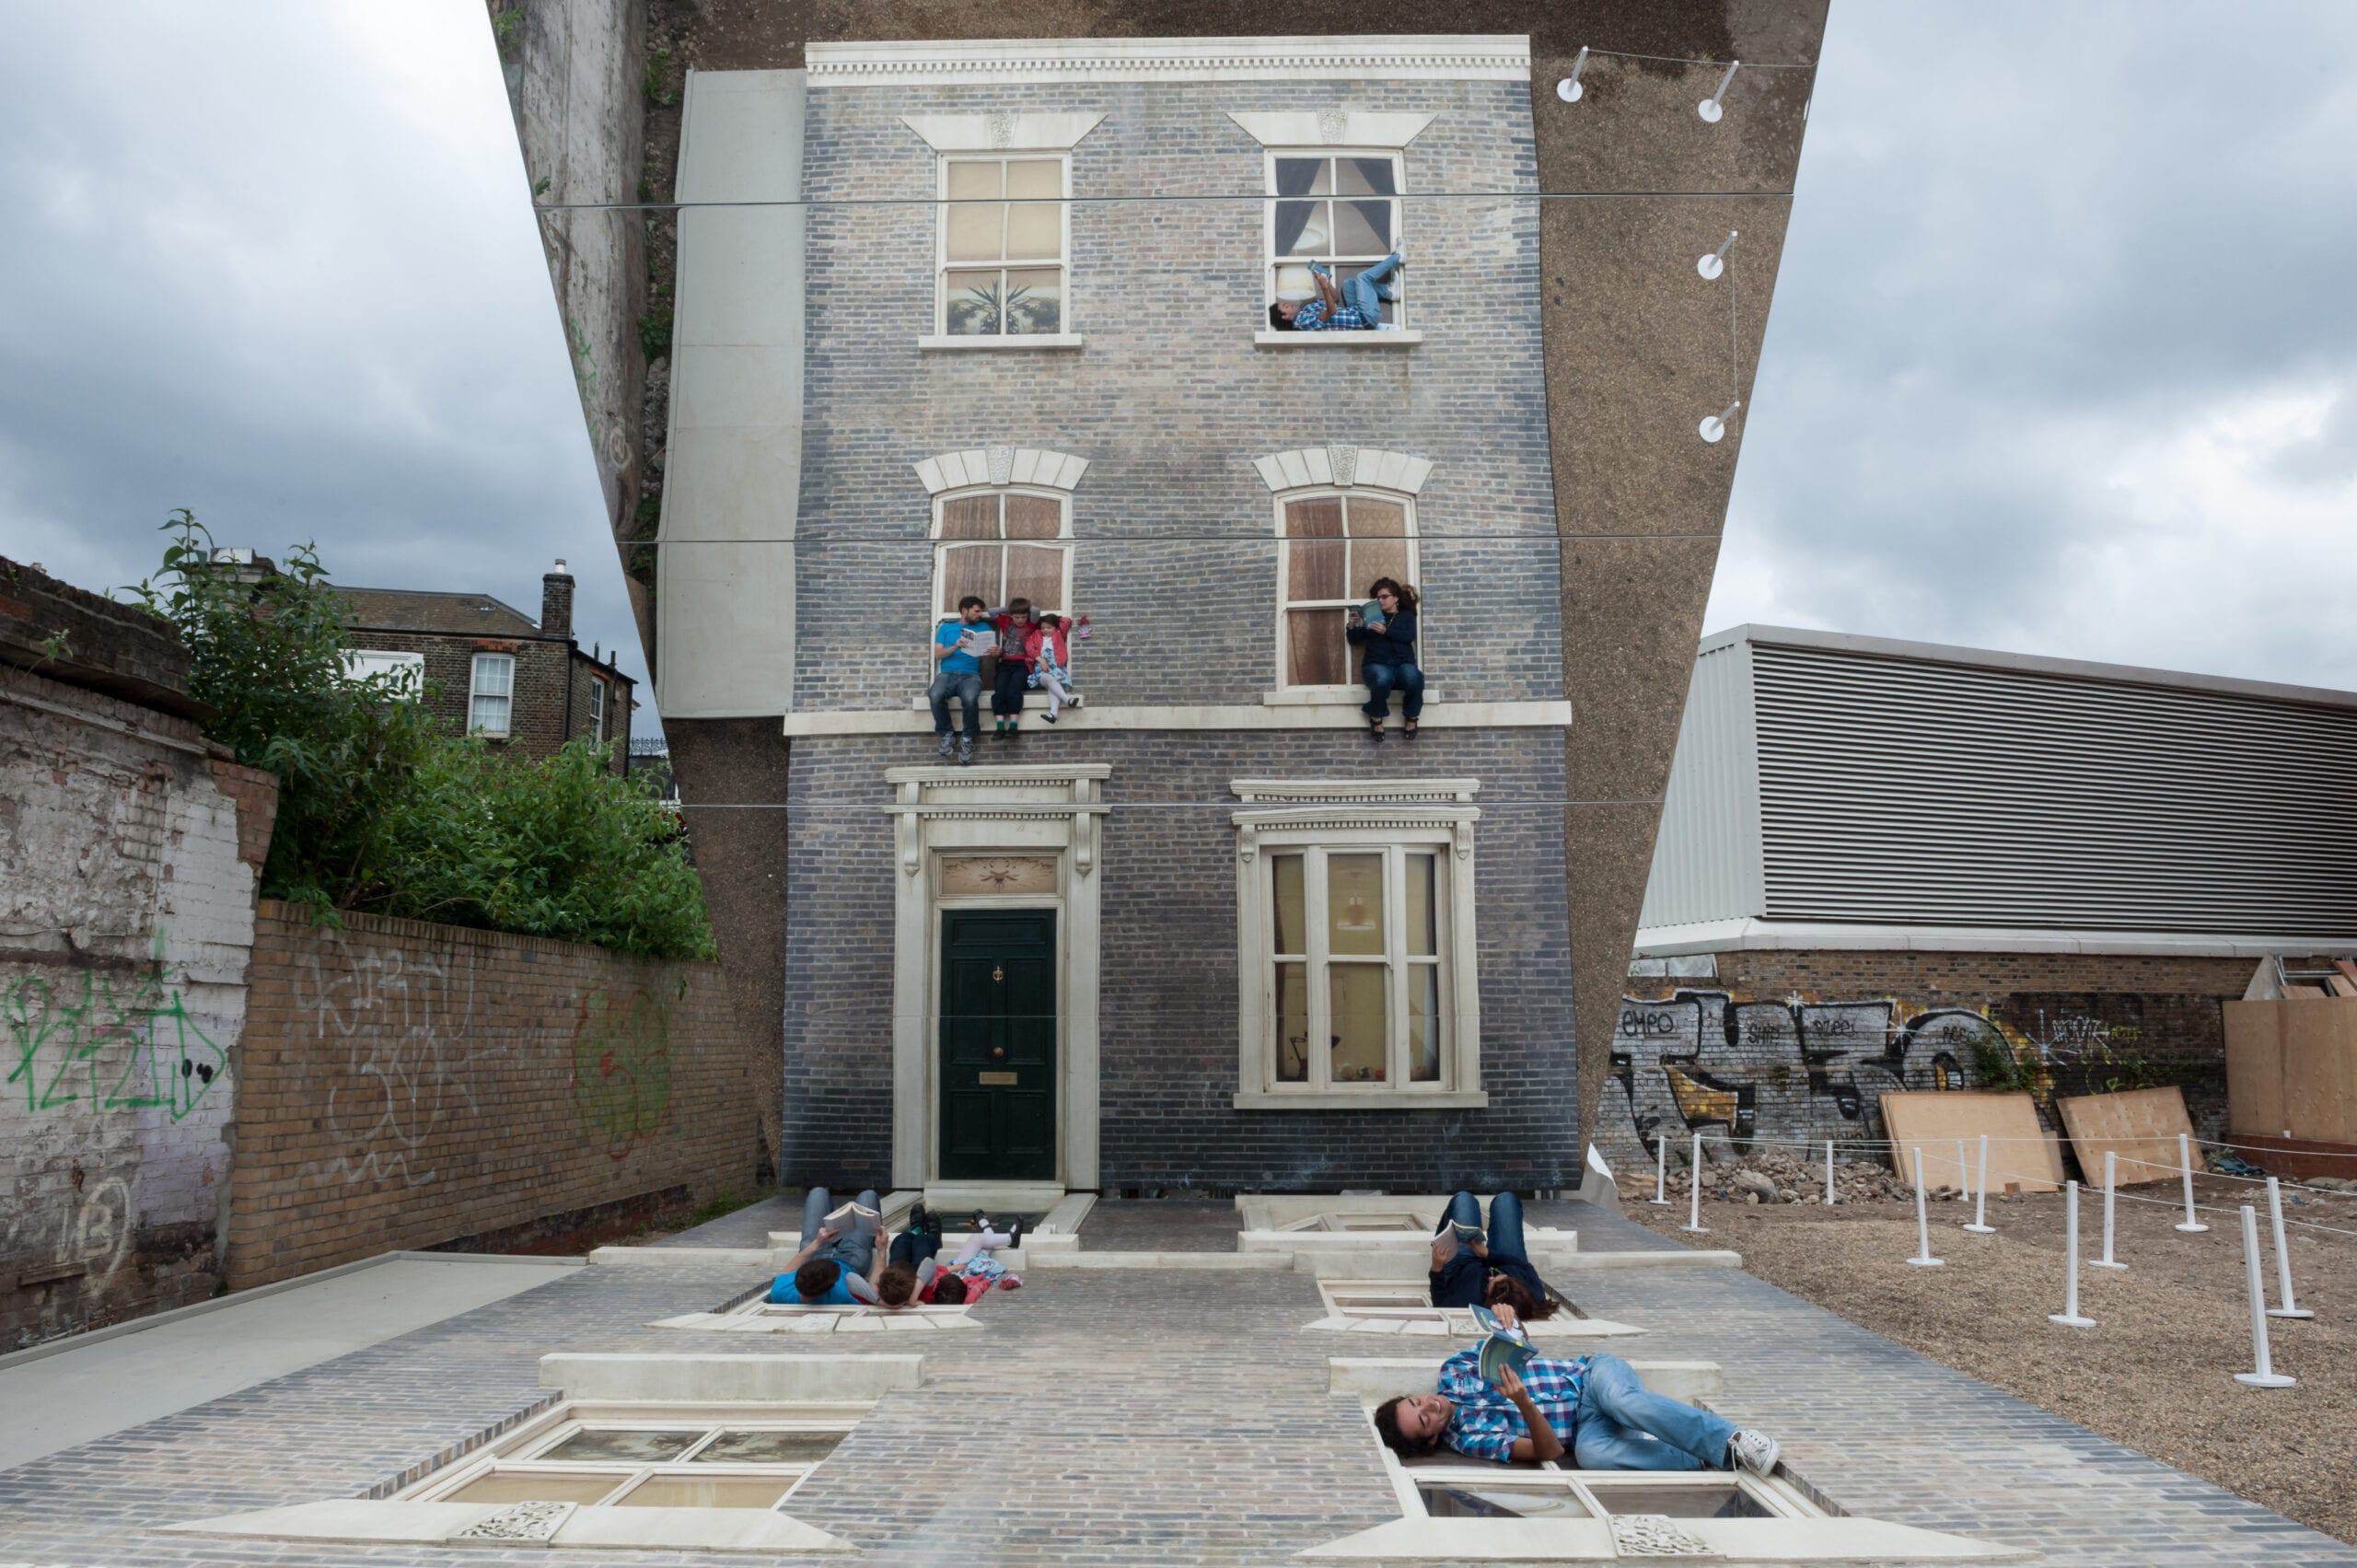 http://installationmag.com/wp-content/uploads/2013/07/Image-1-Leandro-Erlich-Dalston-House.-Photo-by-Gar-Powell-Evans.-Barbican-Art-Gallery-2013.jpg